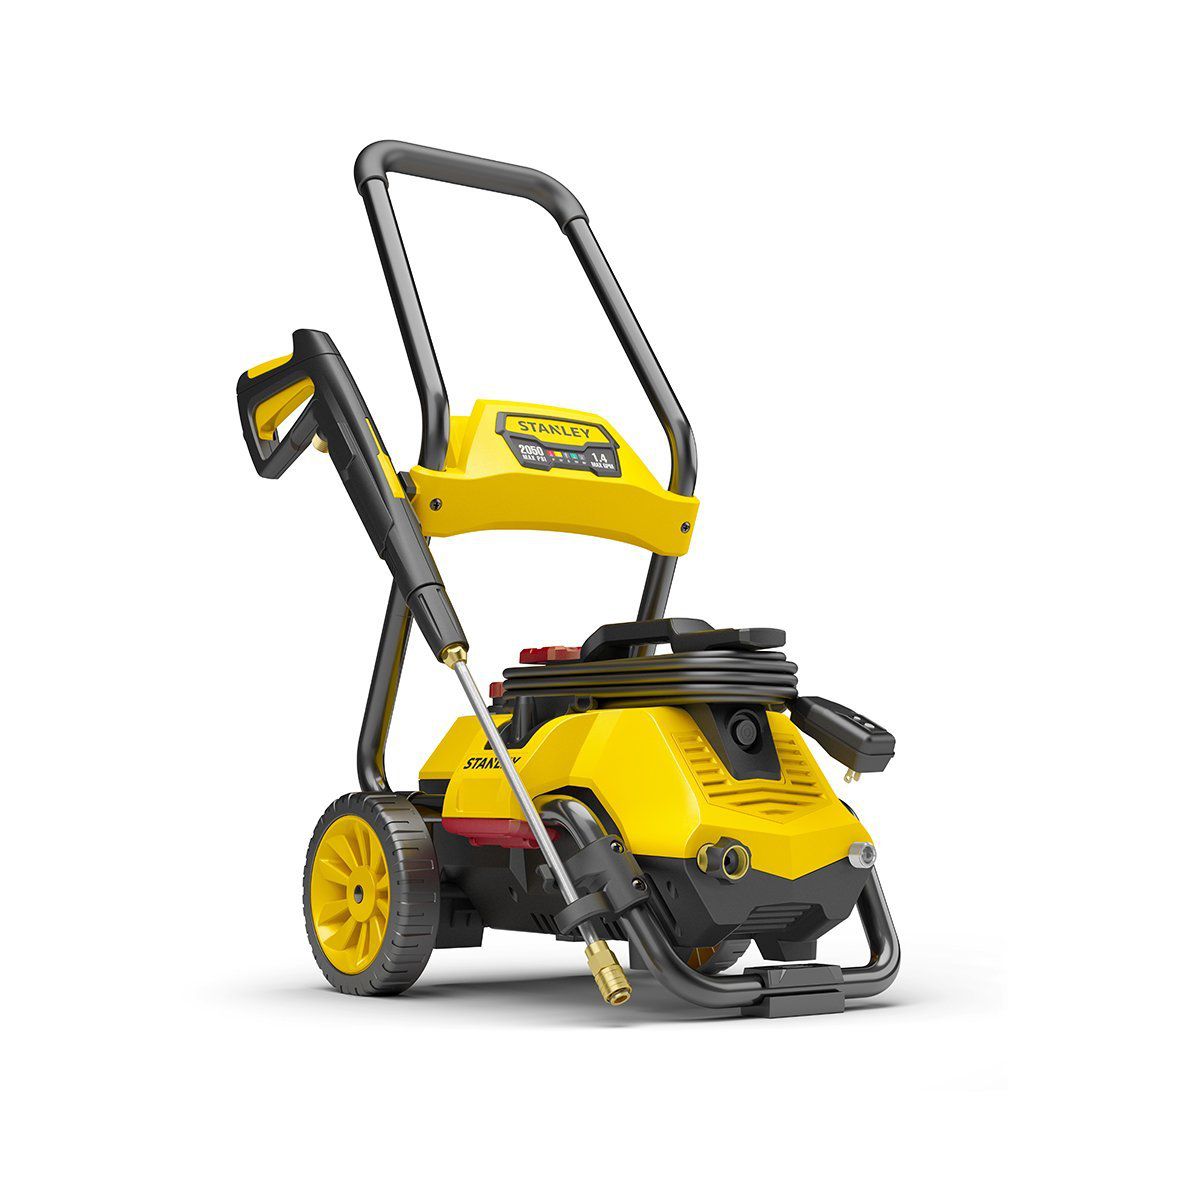 Stanley SLP2050 2050 psi 2-in-1 Electric Pressure Washer